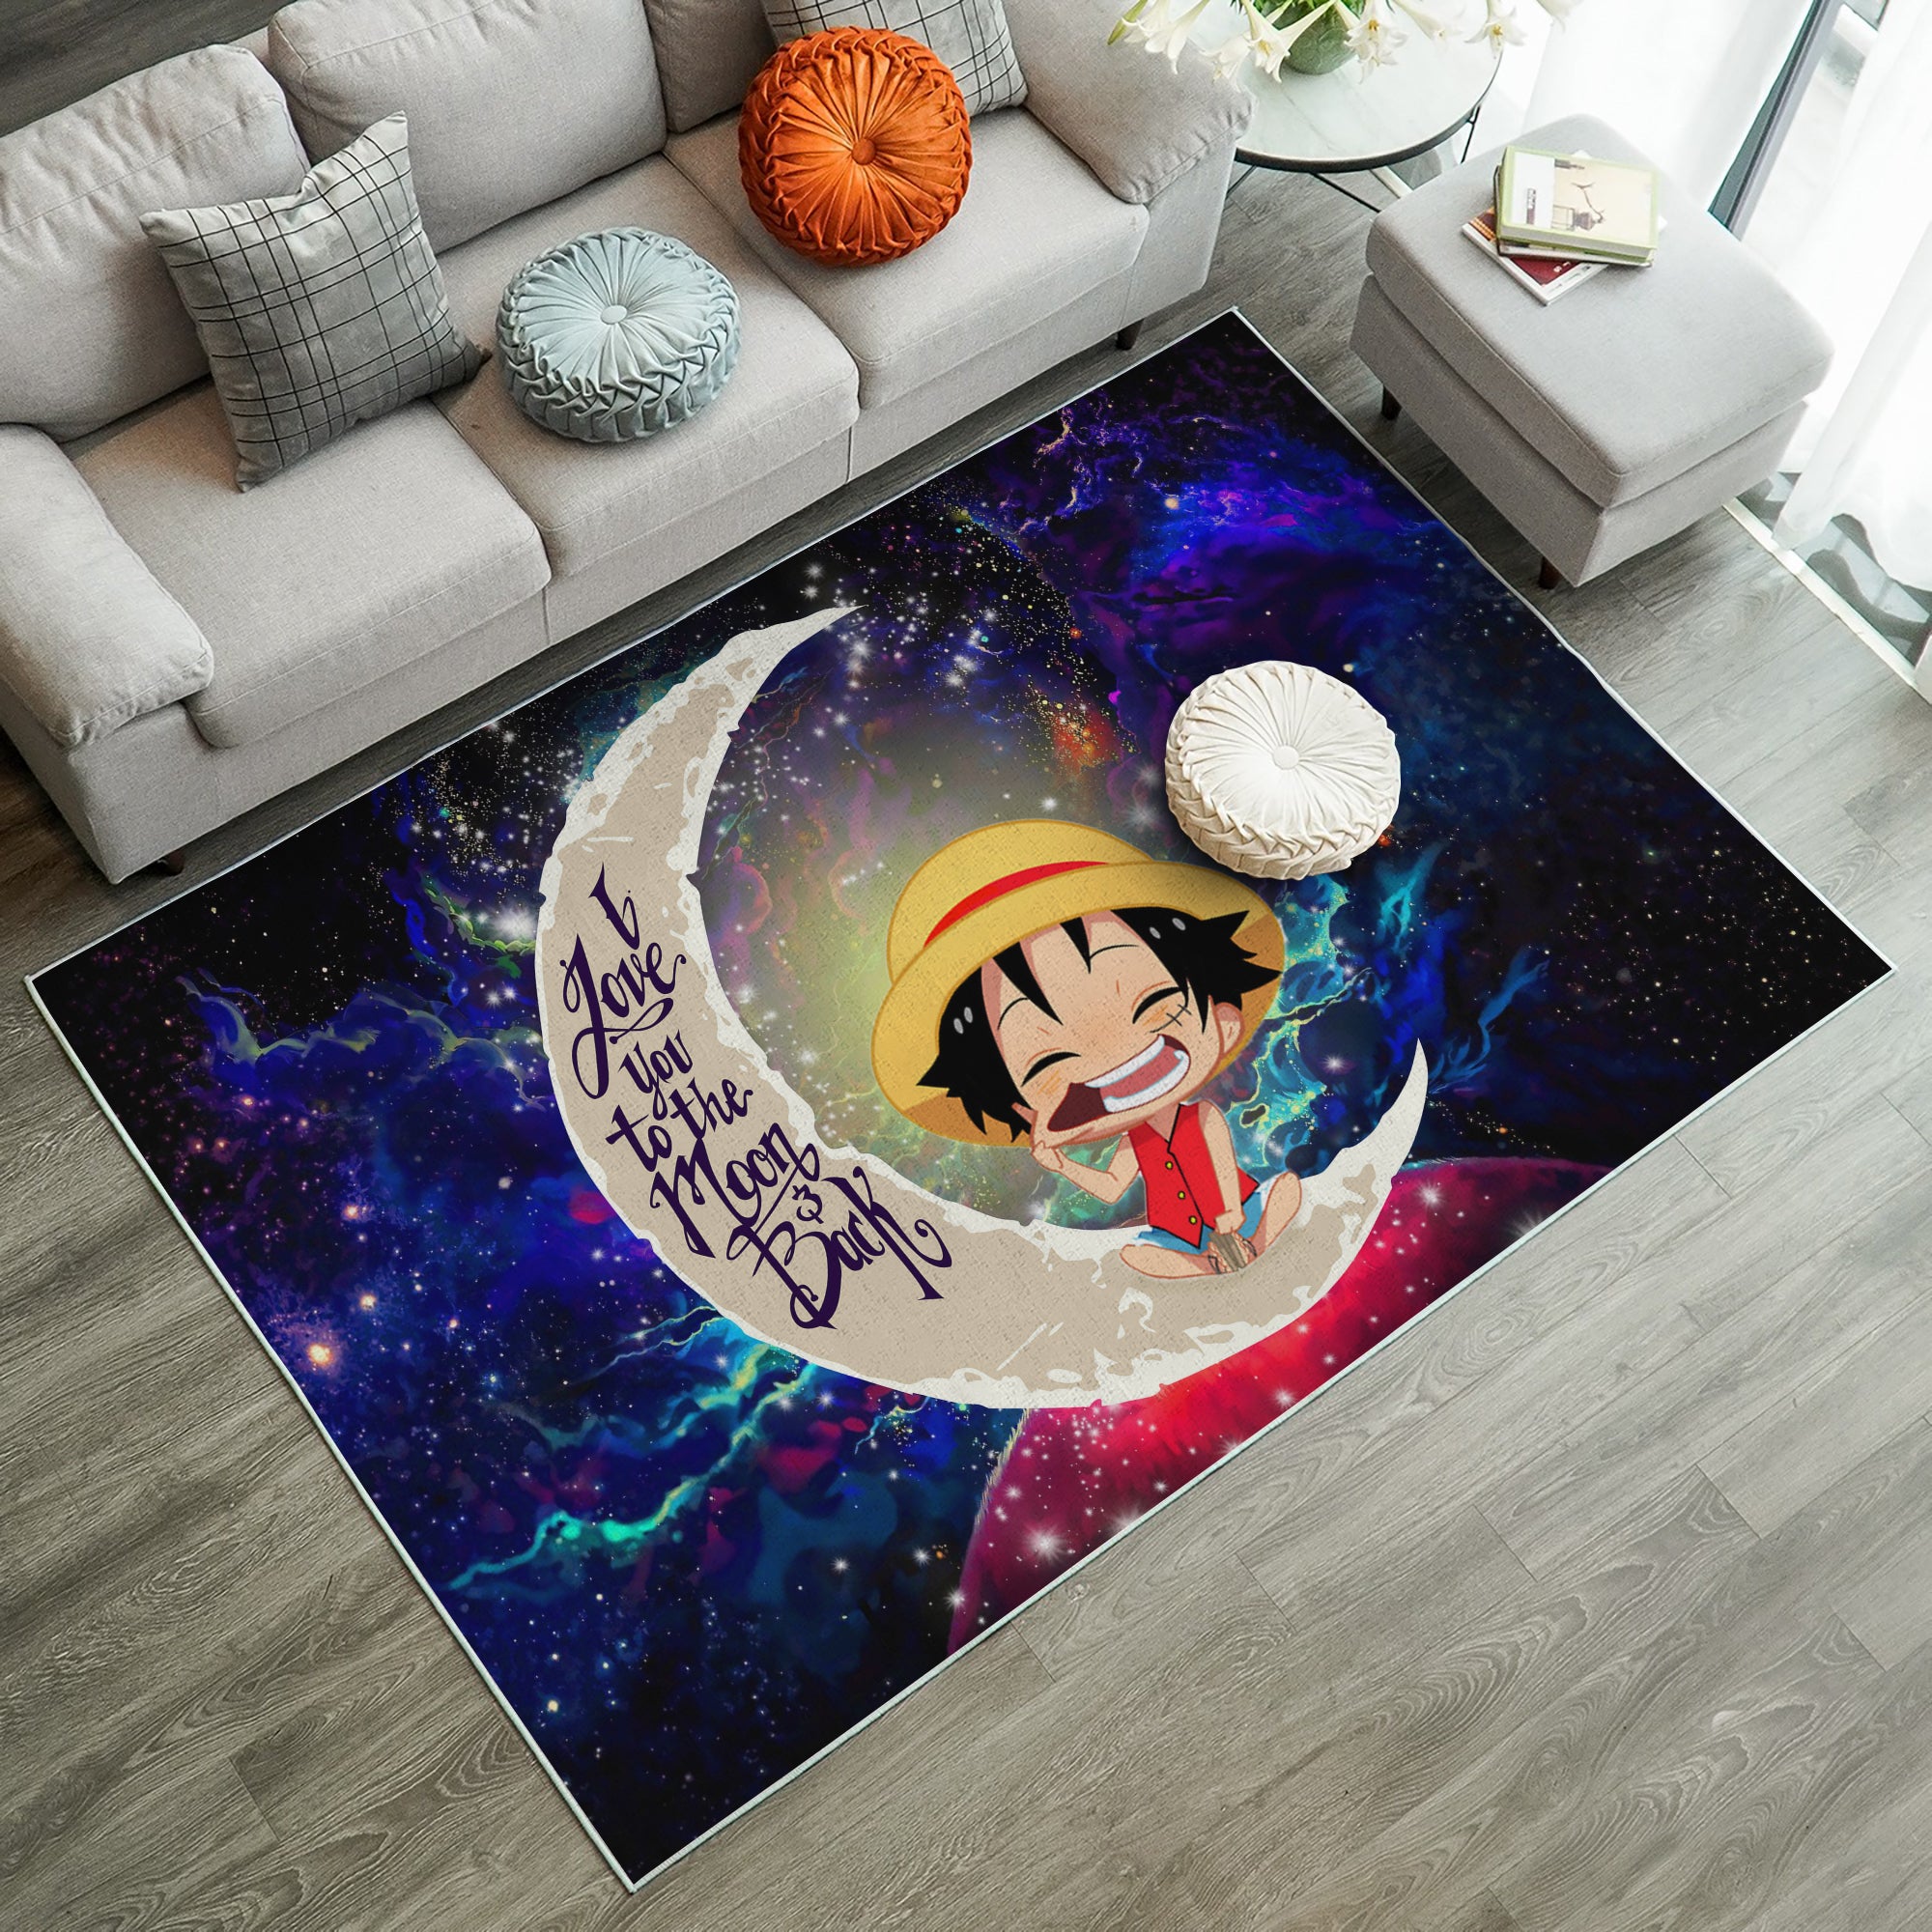 Luffy One Piece Love You To The Moon Galaxy Carpet Rug Home Room Decor